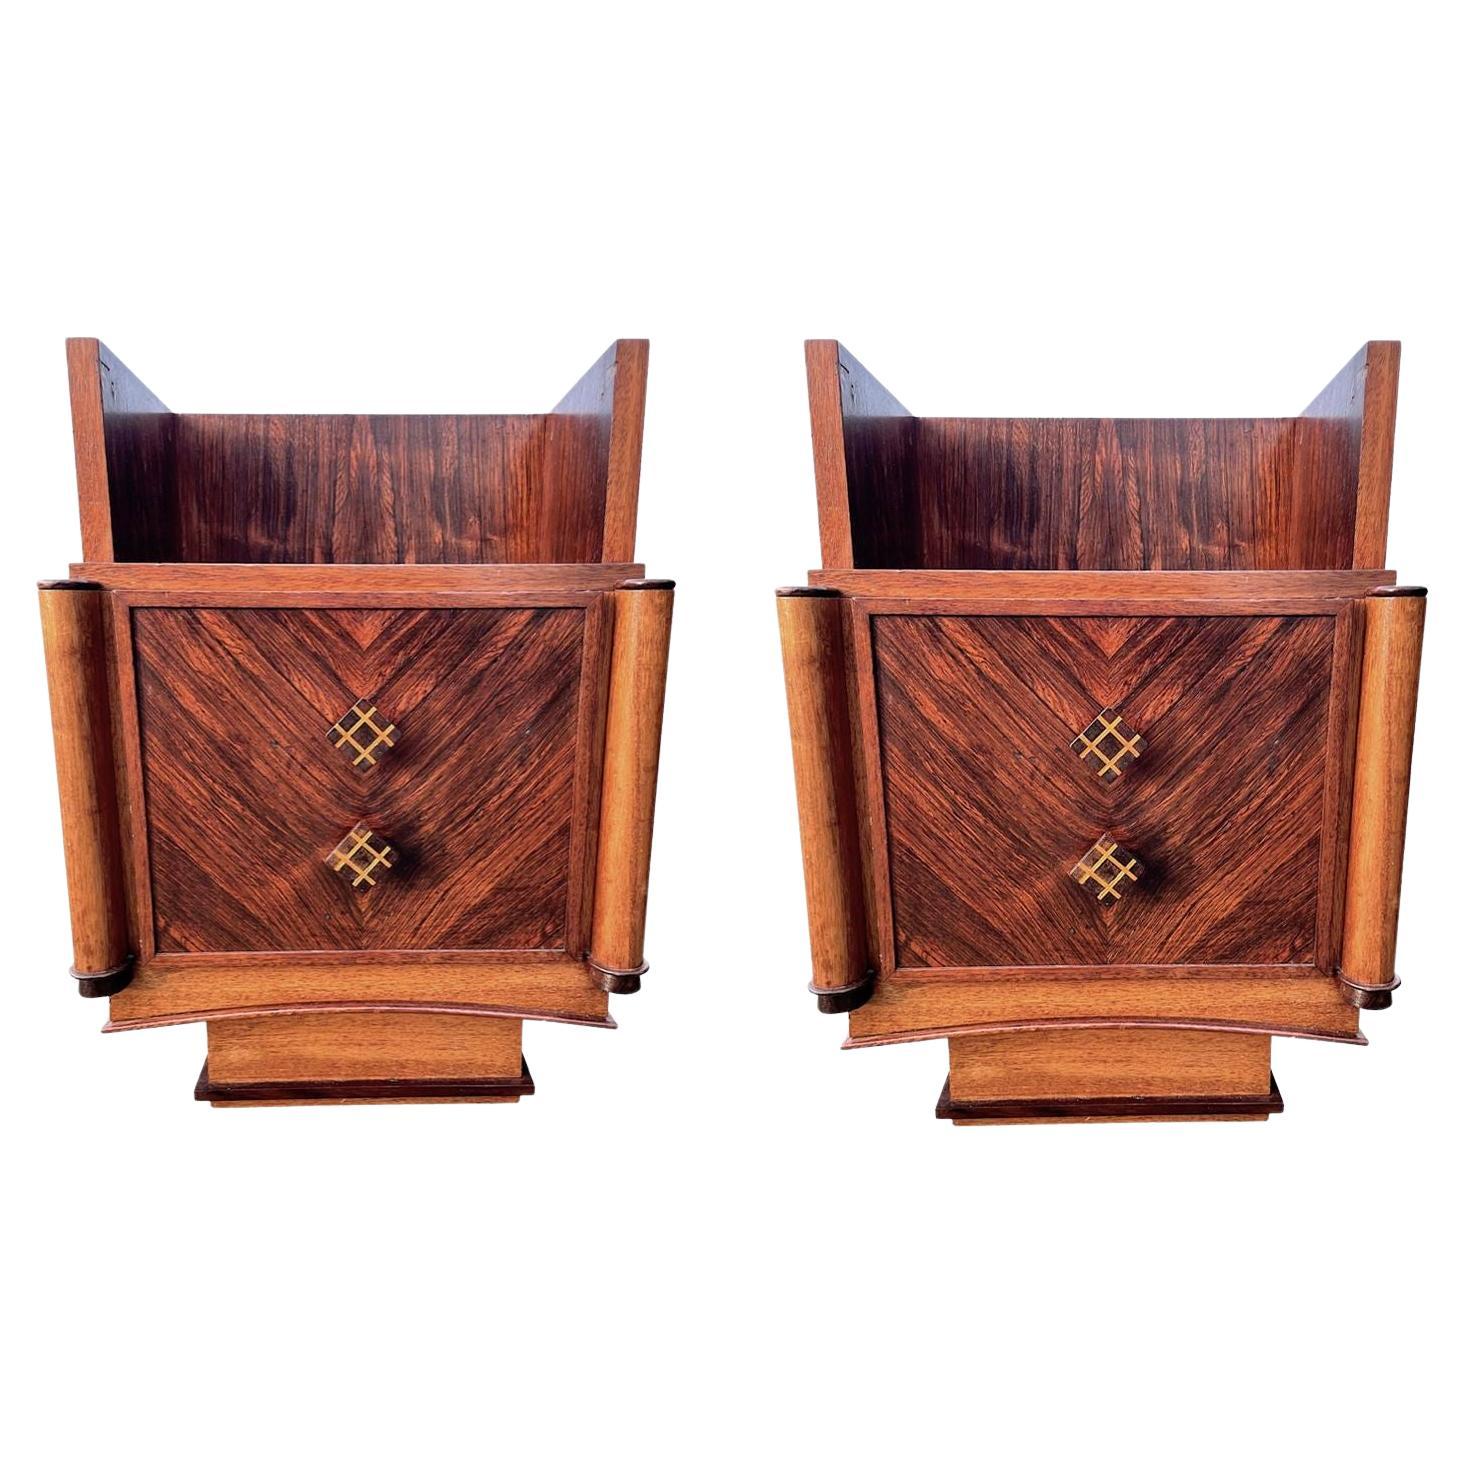 Pair of 1930s Art Deco Walnut Bedside Table with Marquetry Detail